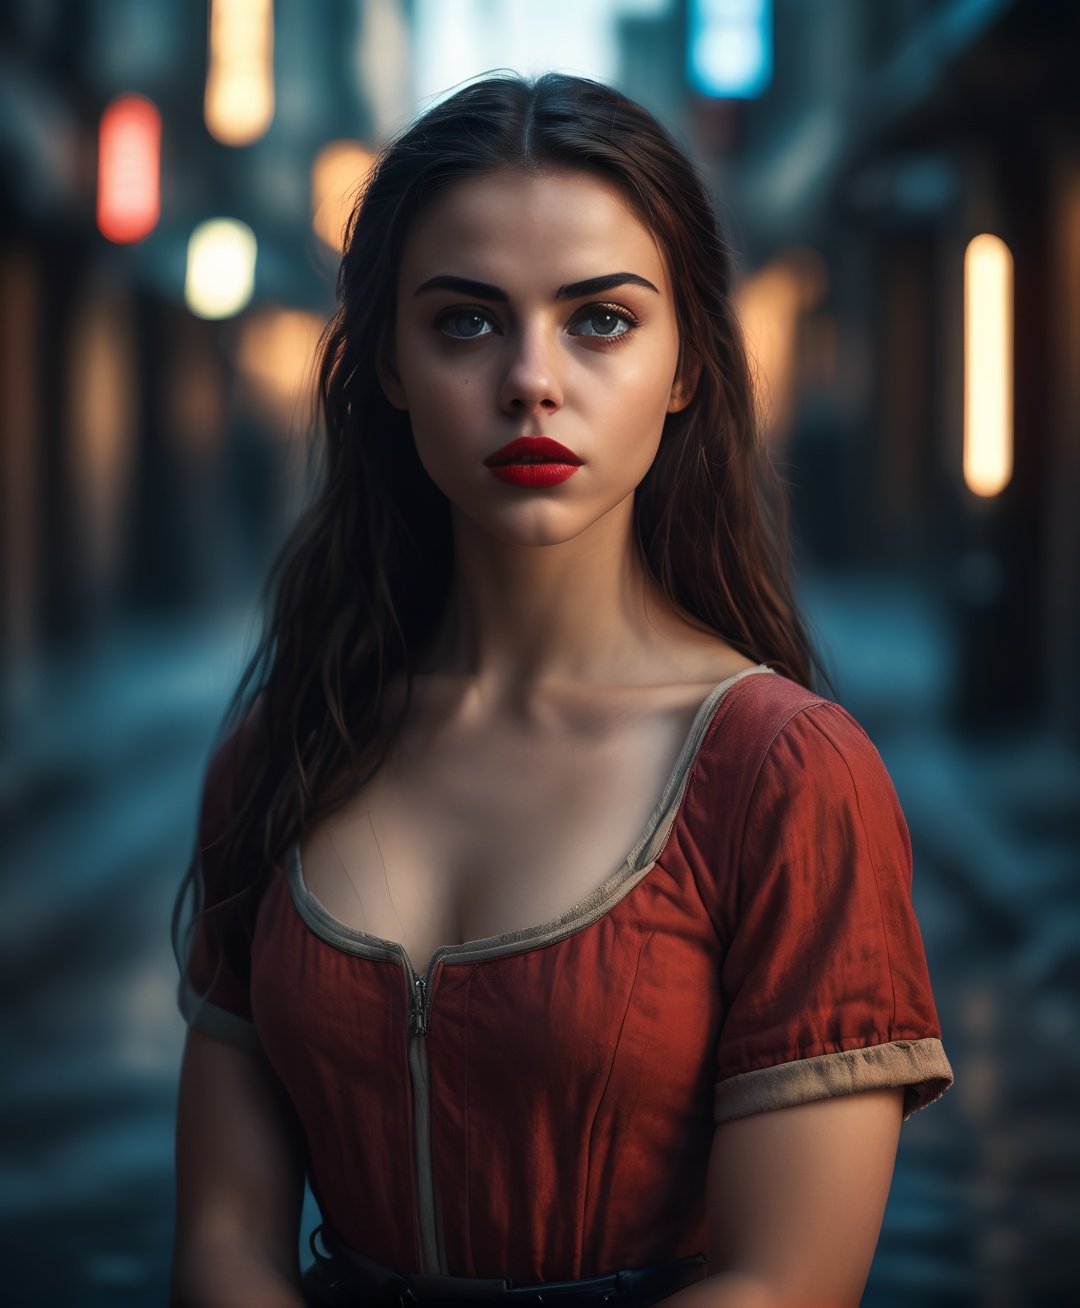 cinematic film still (Raw Photo:1.3) of (Ultrarealistic:1.3),(Angry:1.3) (detailed face, detailed eyes, clear skin, clear eyes), woman,1girl, ekpunobi, dark hair, long hair, dark skin, brown eyes, red lipstick, full body, looking at viewer, portrait, photography, detailed skin, realistic, photo-realistic, 8k, highly detailed, full length frame, High detail RAW color art, diffused soft lighting, shallow depth of field, sharp focus, hyperrealism, cinematic lighting, cyberpunk city, neon light, cyberpunk background<lora:RPGCitizenFemaleXL:0.8> <lora:UnderboobXL:1.3>,Highly Detailed,(Fujifilm Superia:1.3),(close portrait:1.3),thematic background . shallow depth of field, vignette, highly detailed, high budget, bokeh, cinemascope, moody, epic, gorgeous, film grain, grainy